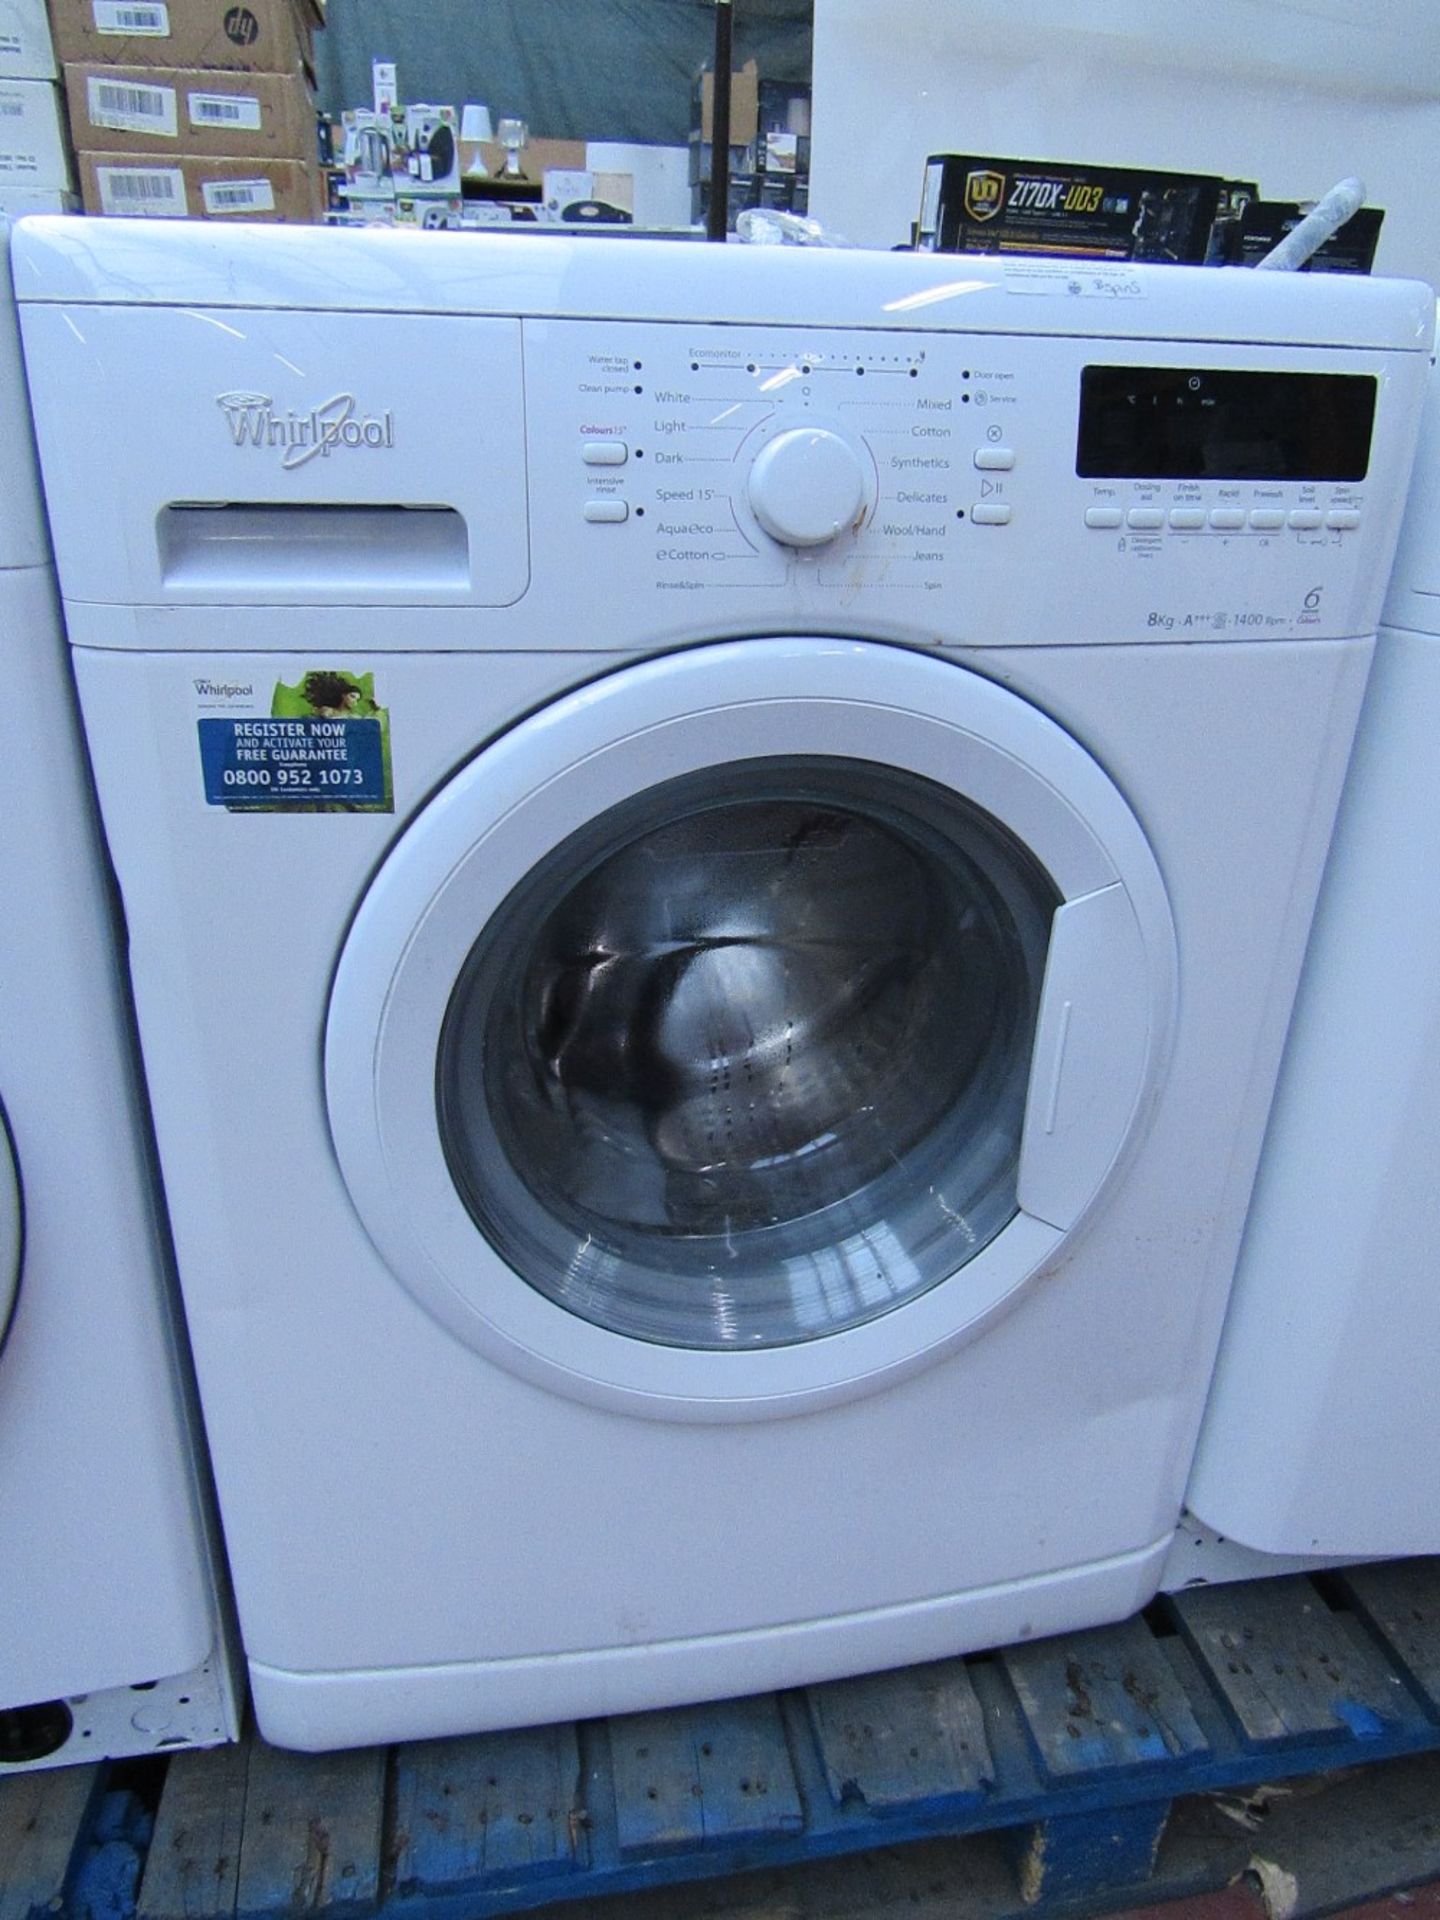 Whirlpool 6th sense Colours 8KG washing machine powers on and Spins.